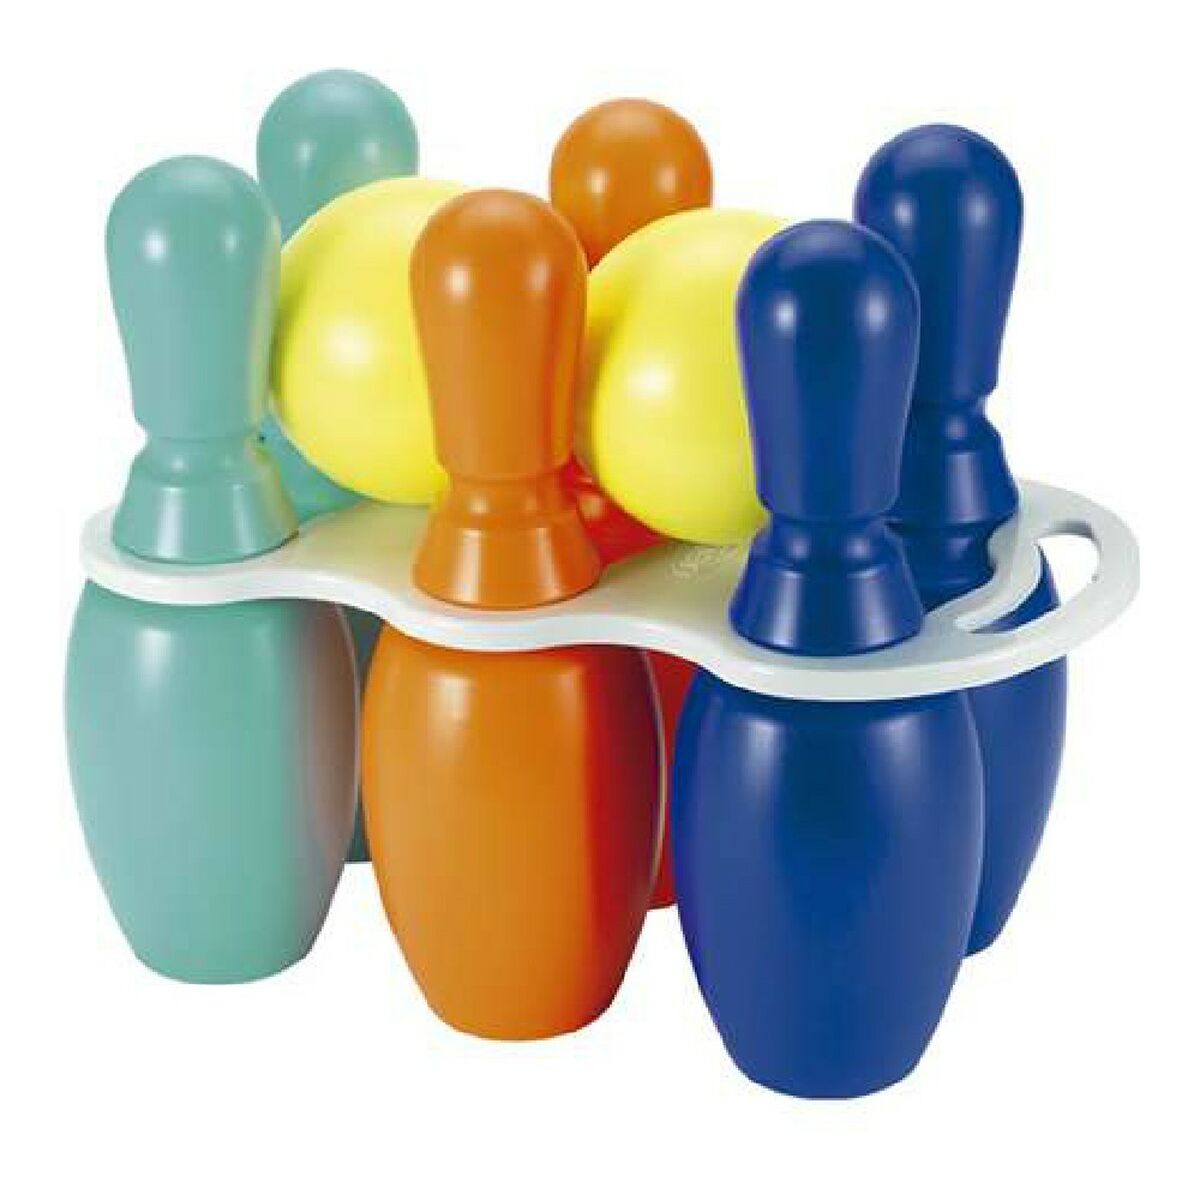 Bowling Game Simba 156 Multicolour (6 uds)